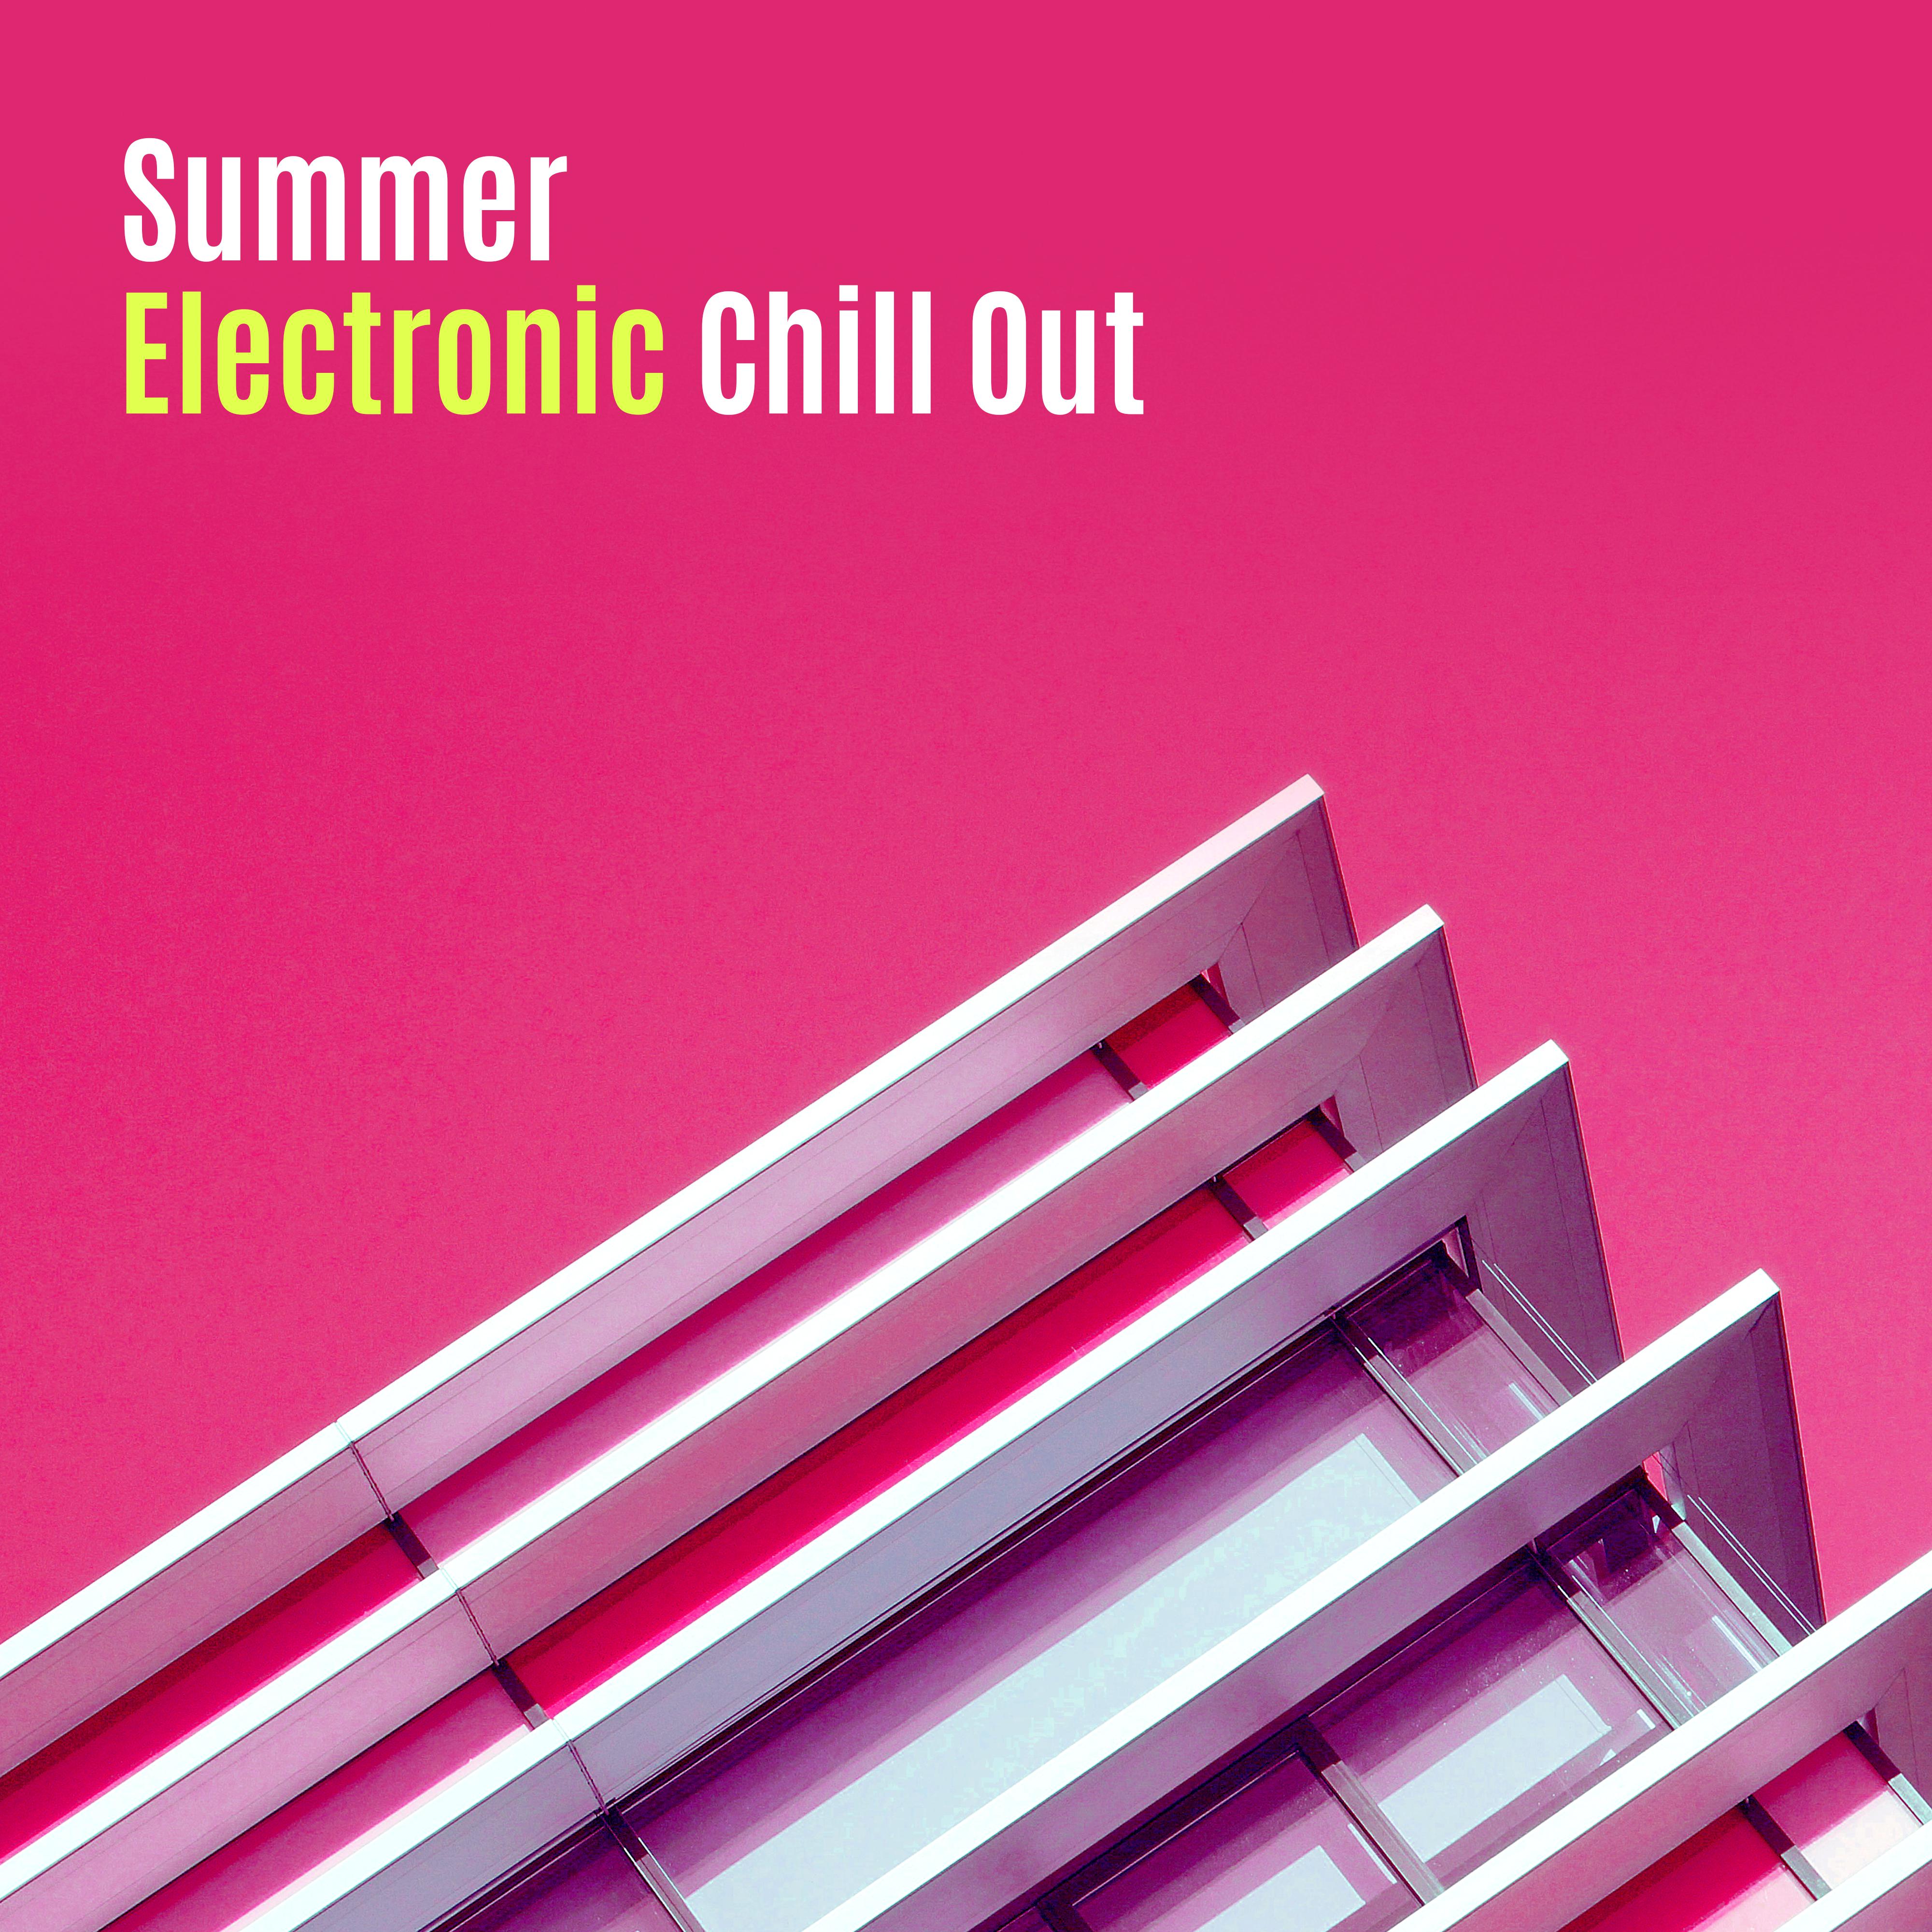 Summer Electronic Chill Out – Chill Out Beats, Easy Listening, Electronic Music, Stress Relief, Beach Lounge